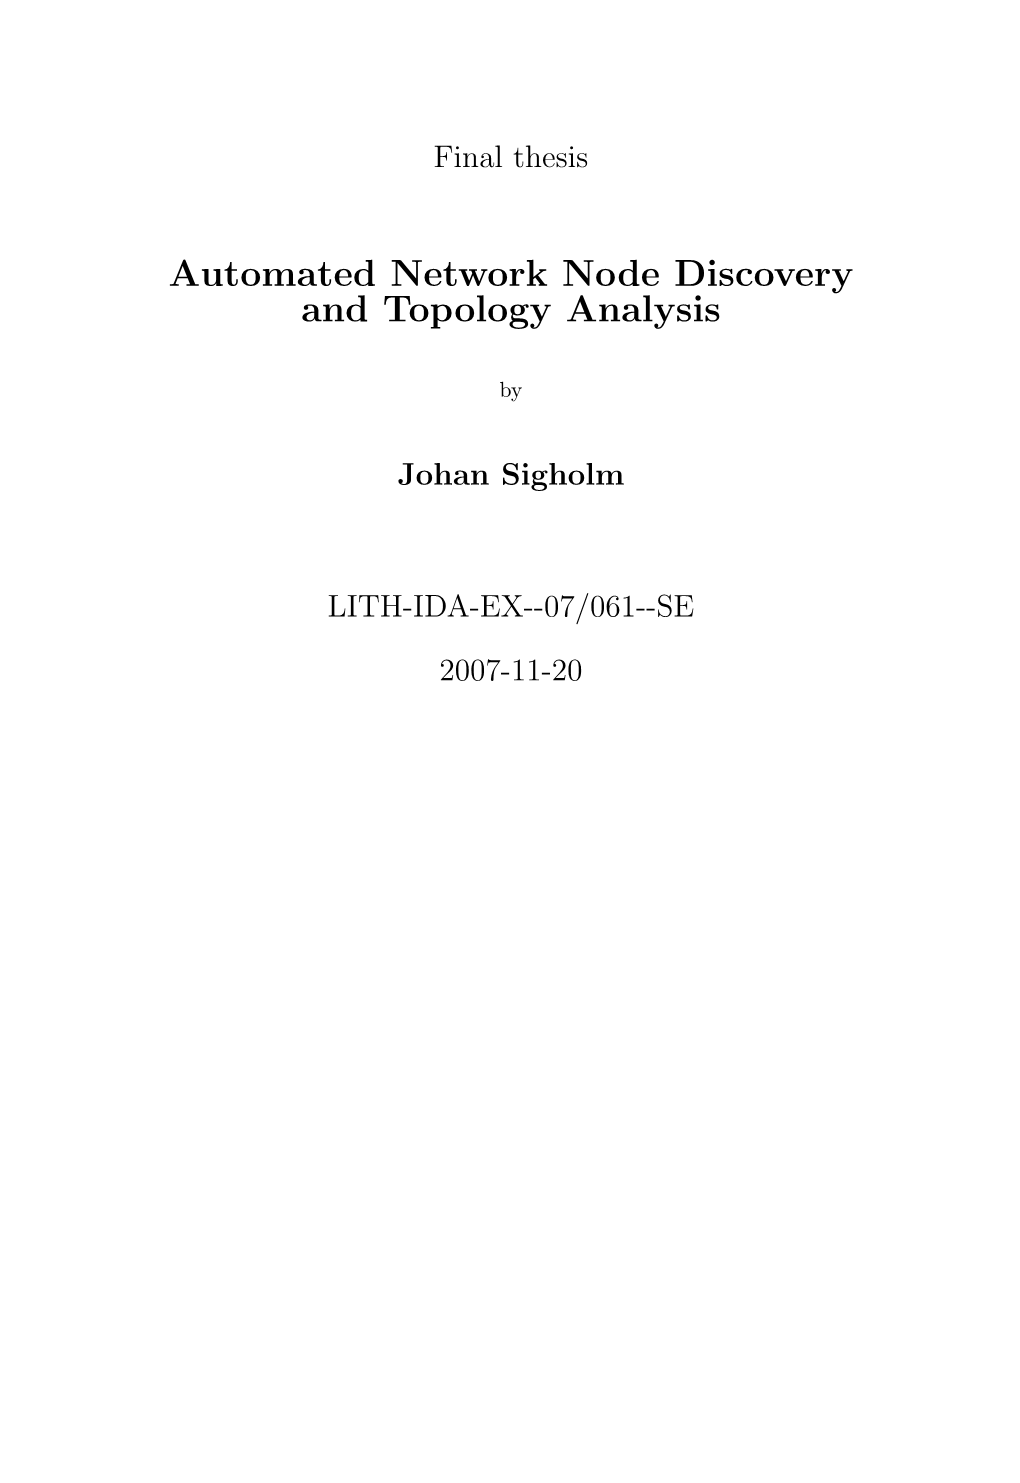 Automated Network Node Discovery and Topology Analysis